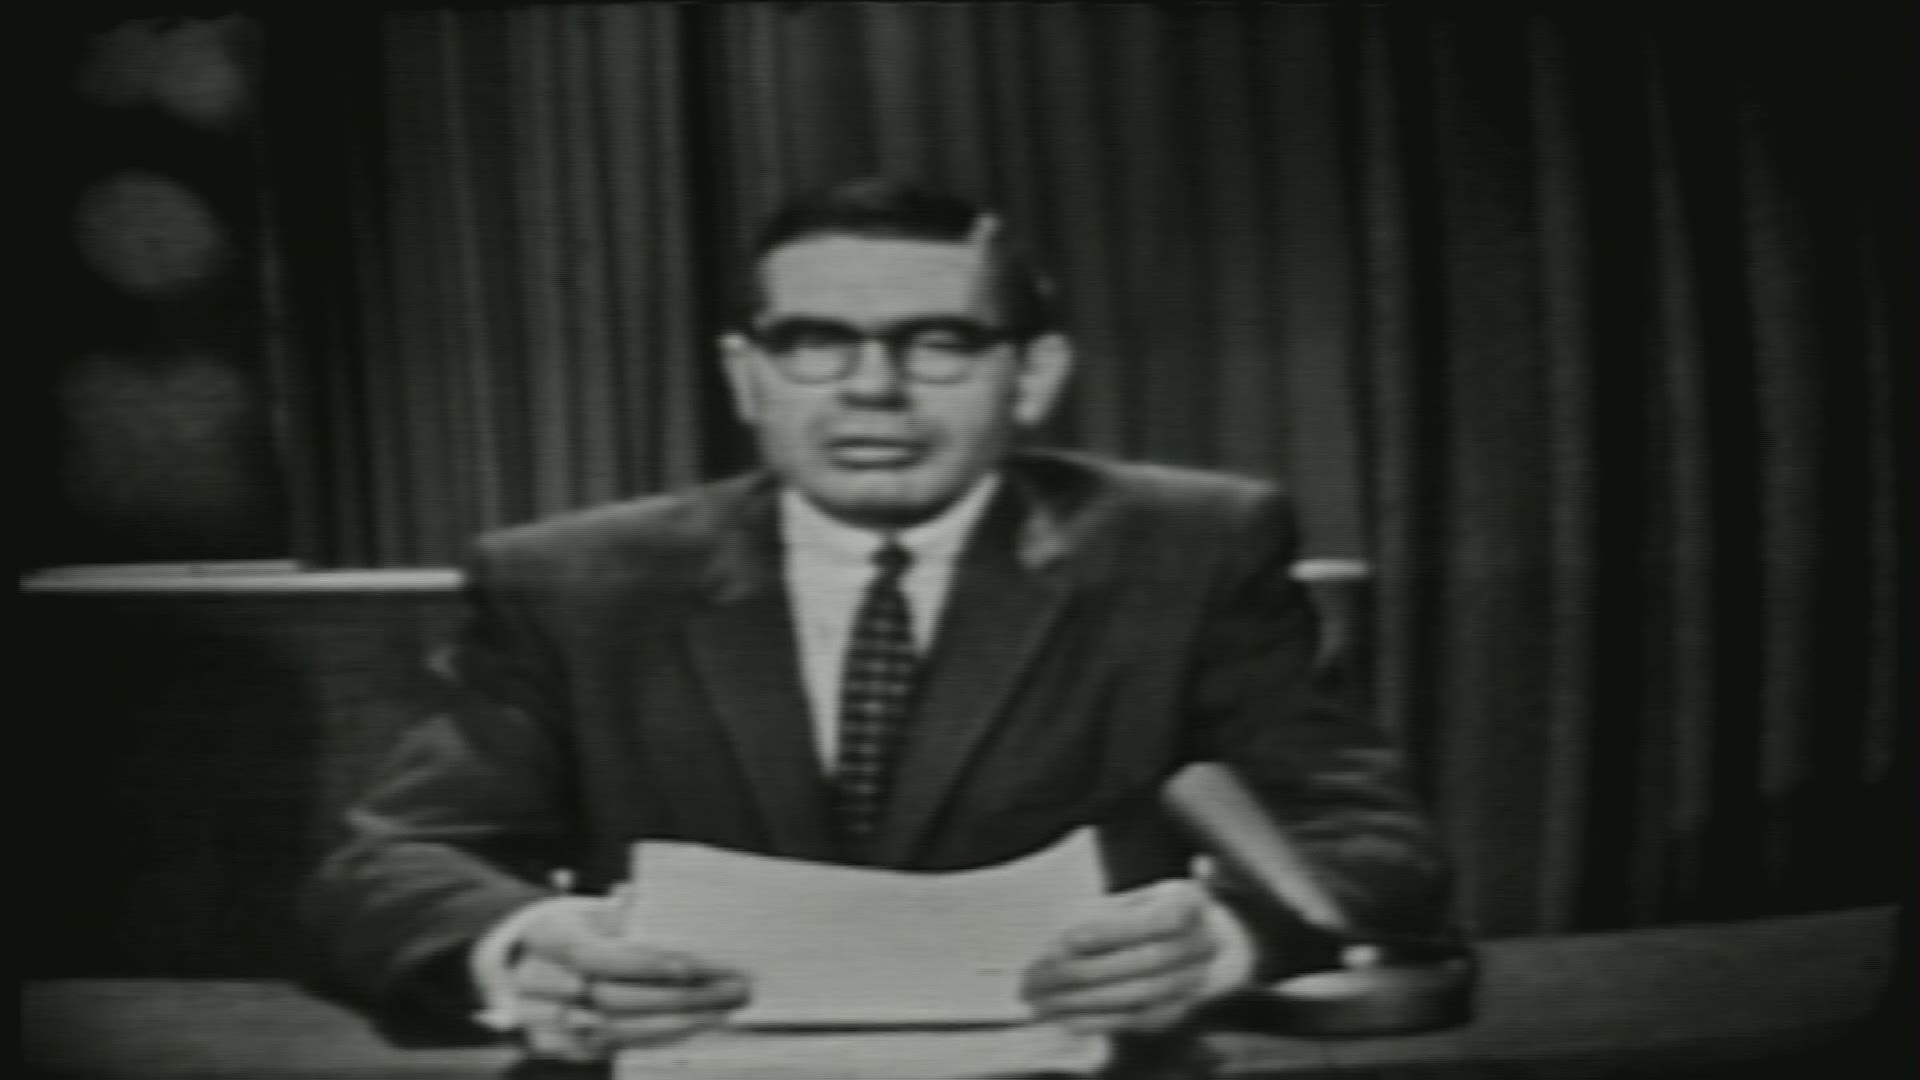 70 moments in WKYC history: A look back at some of the key stories we've covered